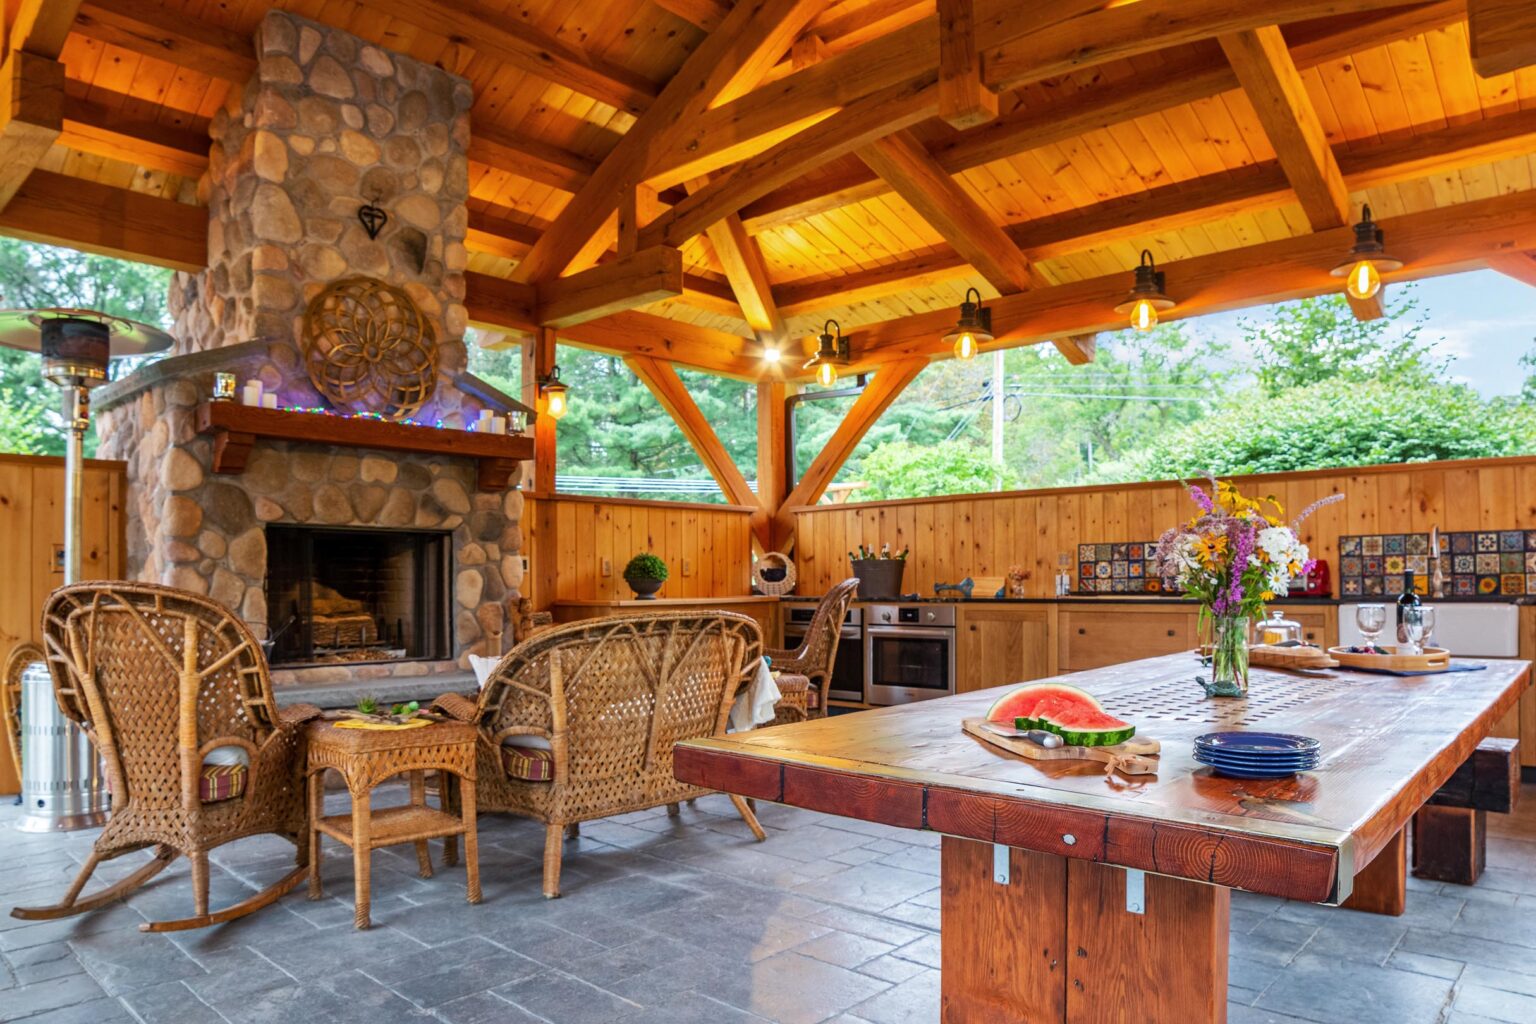 Outdoor Timber Frame Pavilion Fireplace by Woodhouse, The Timber Frame Company